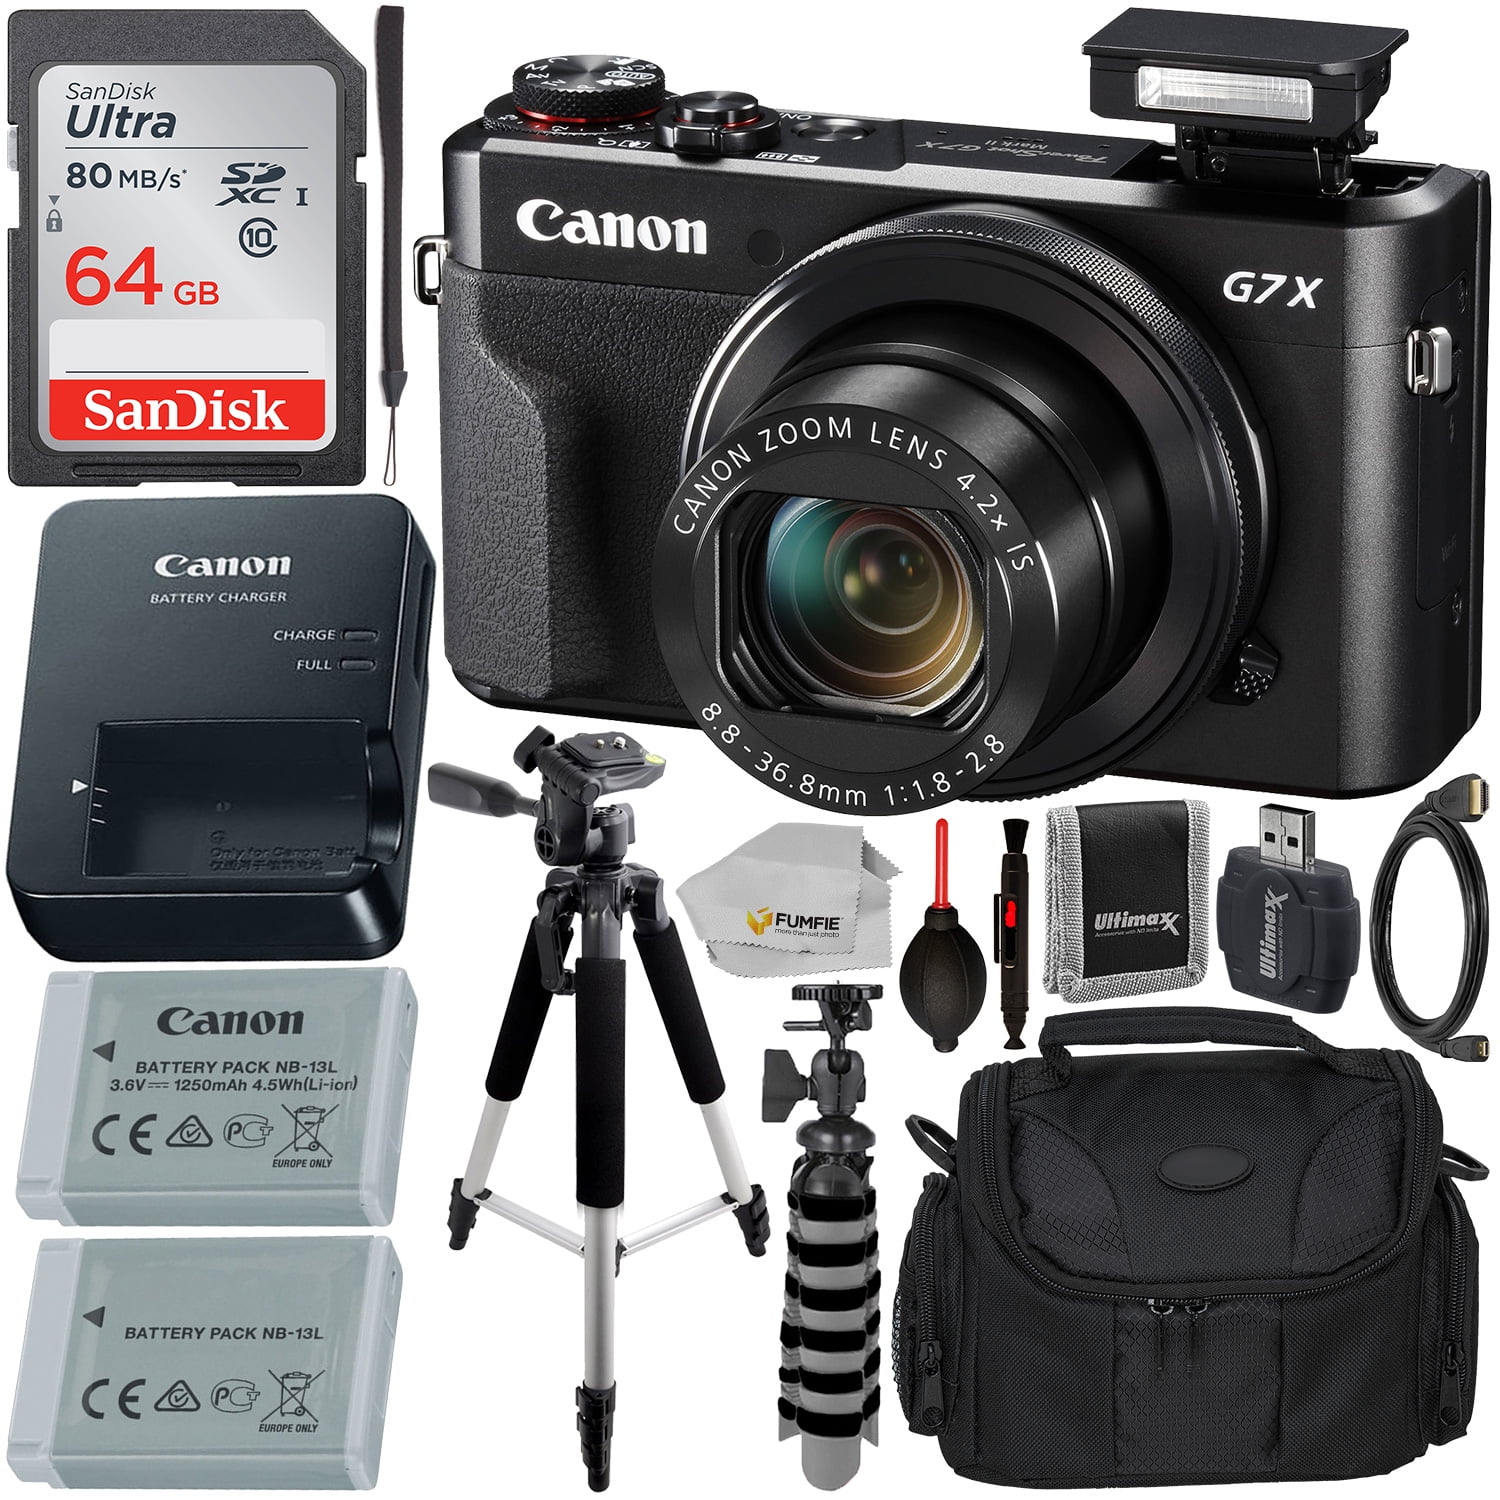 Canon PowerShot G7 X Mark II Digital Camera (Black) with Essential  Accessory Bundle - Includes: SanDisk Ultra 64GB SDXC Memory Card, Extended  Life 